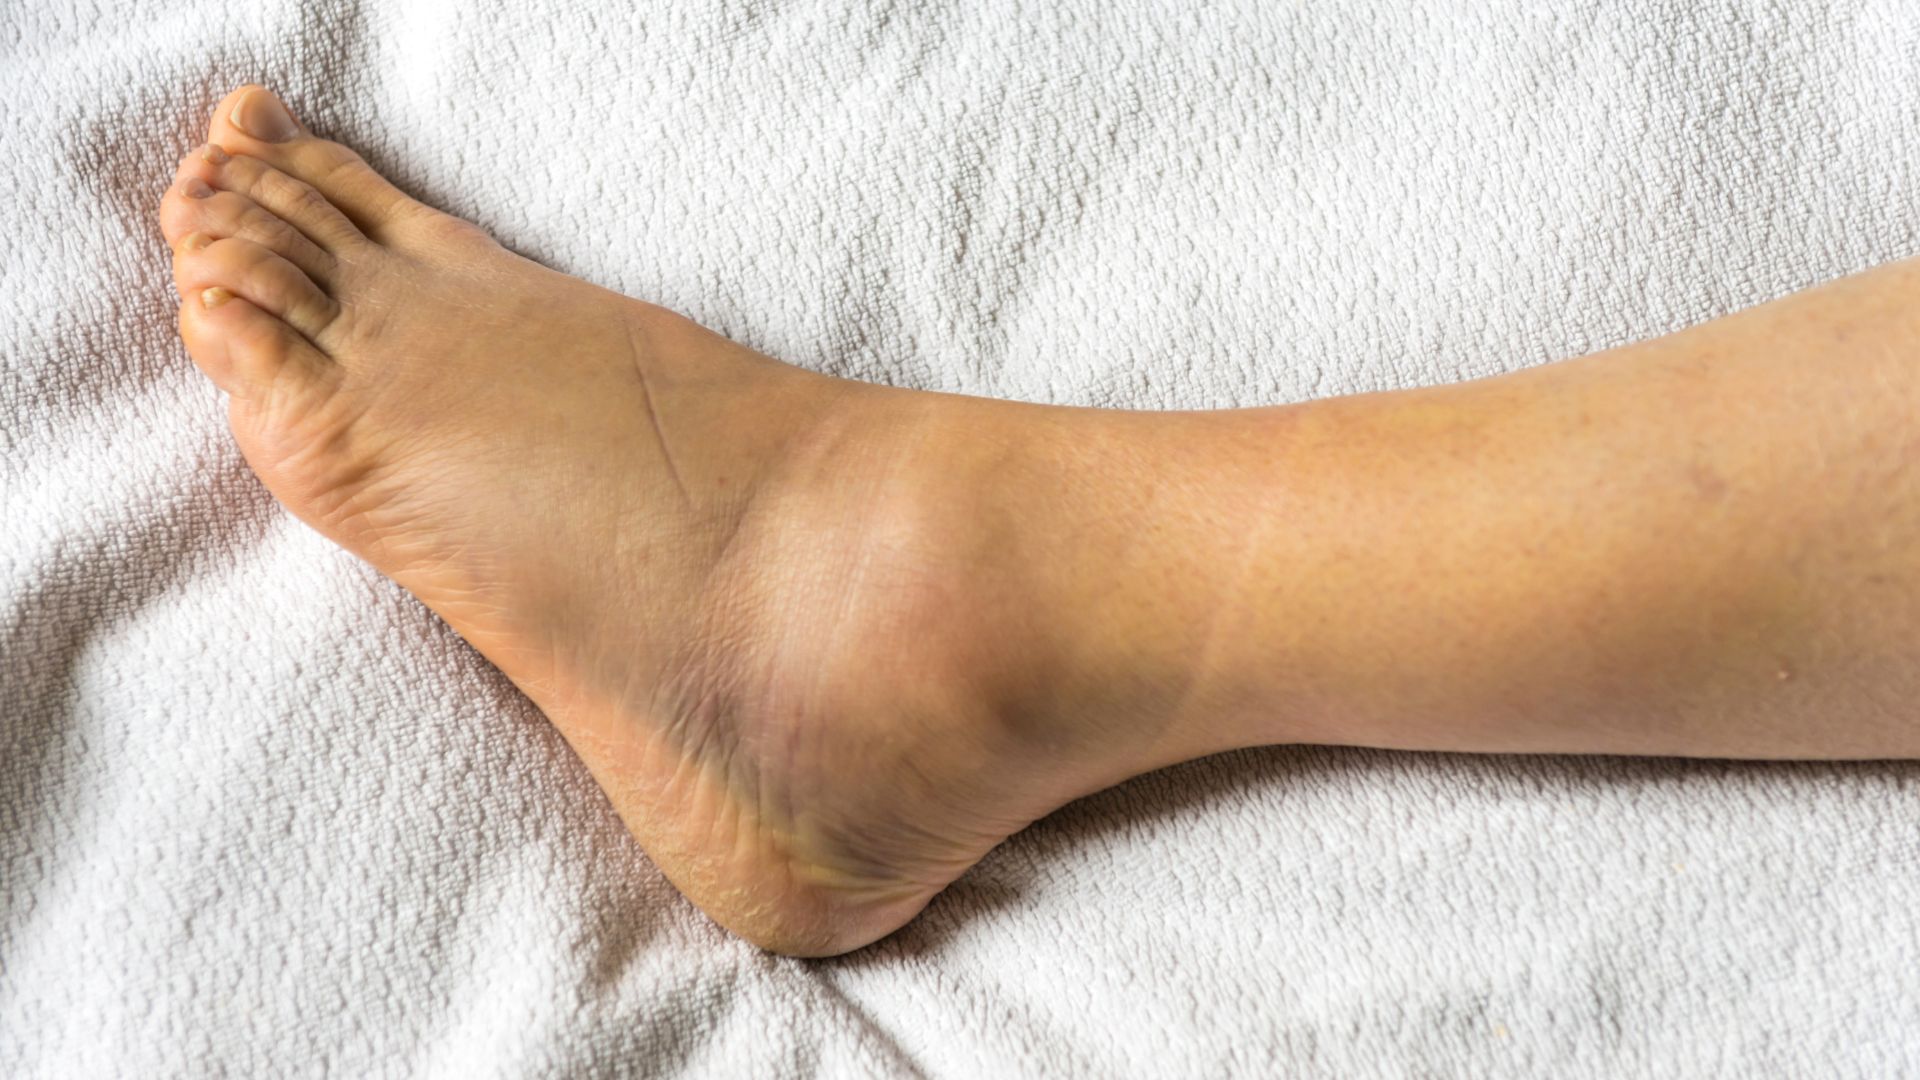 Chronic Ankle Instability FAQs, Foot and Ankle